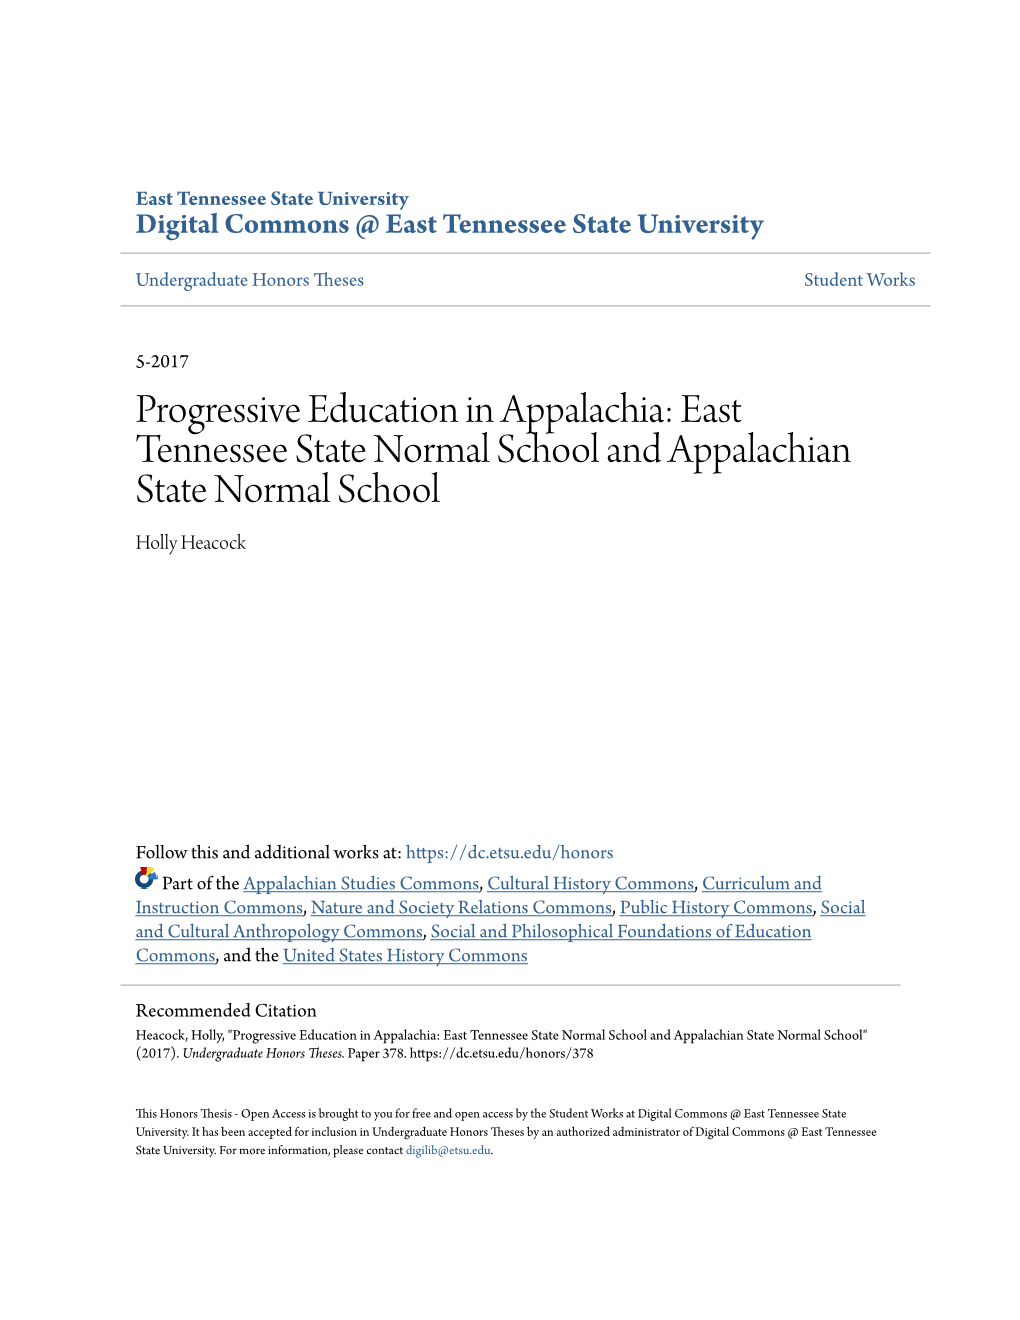 Progressive Education in Appalachia: East Tennessee State Normal School and Appalachian State Normal School Holly Heacock